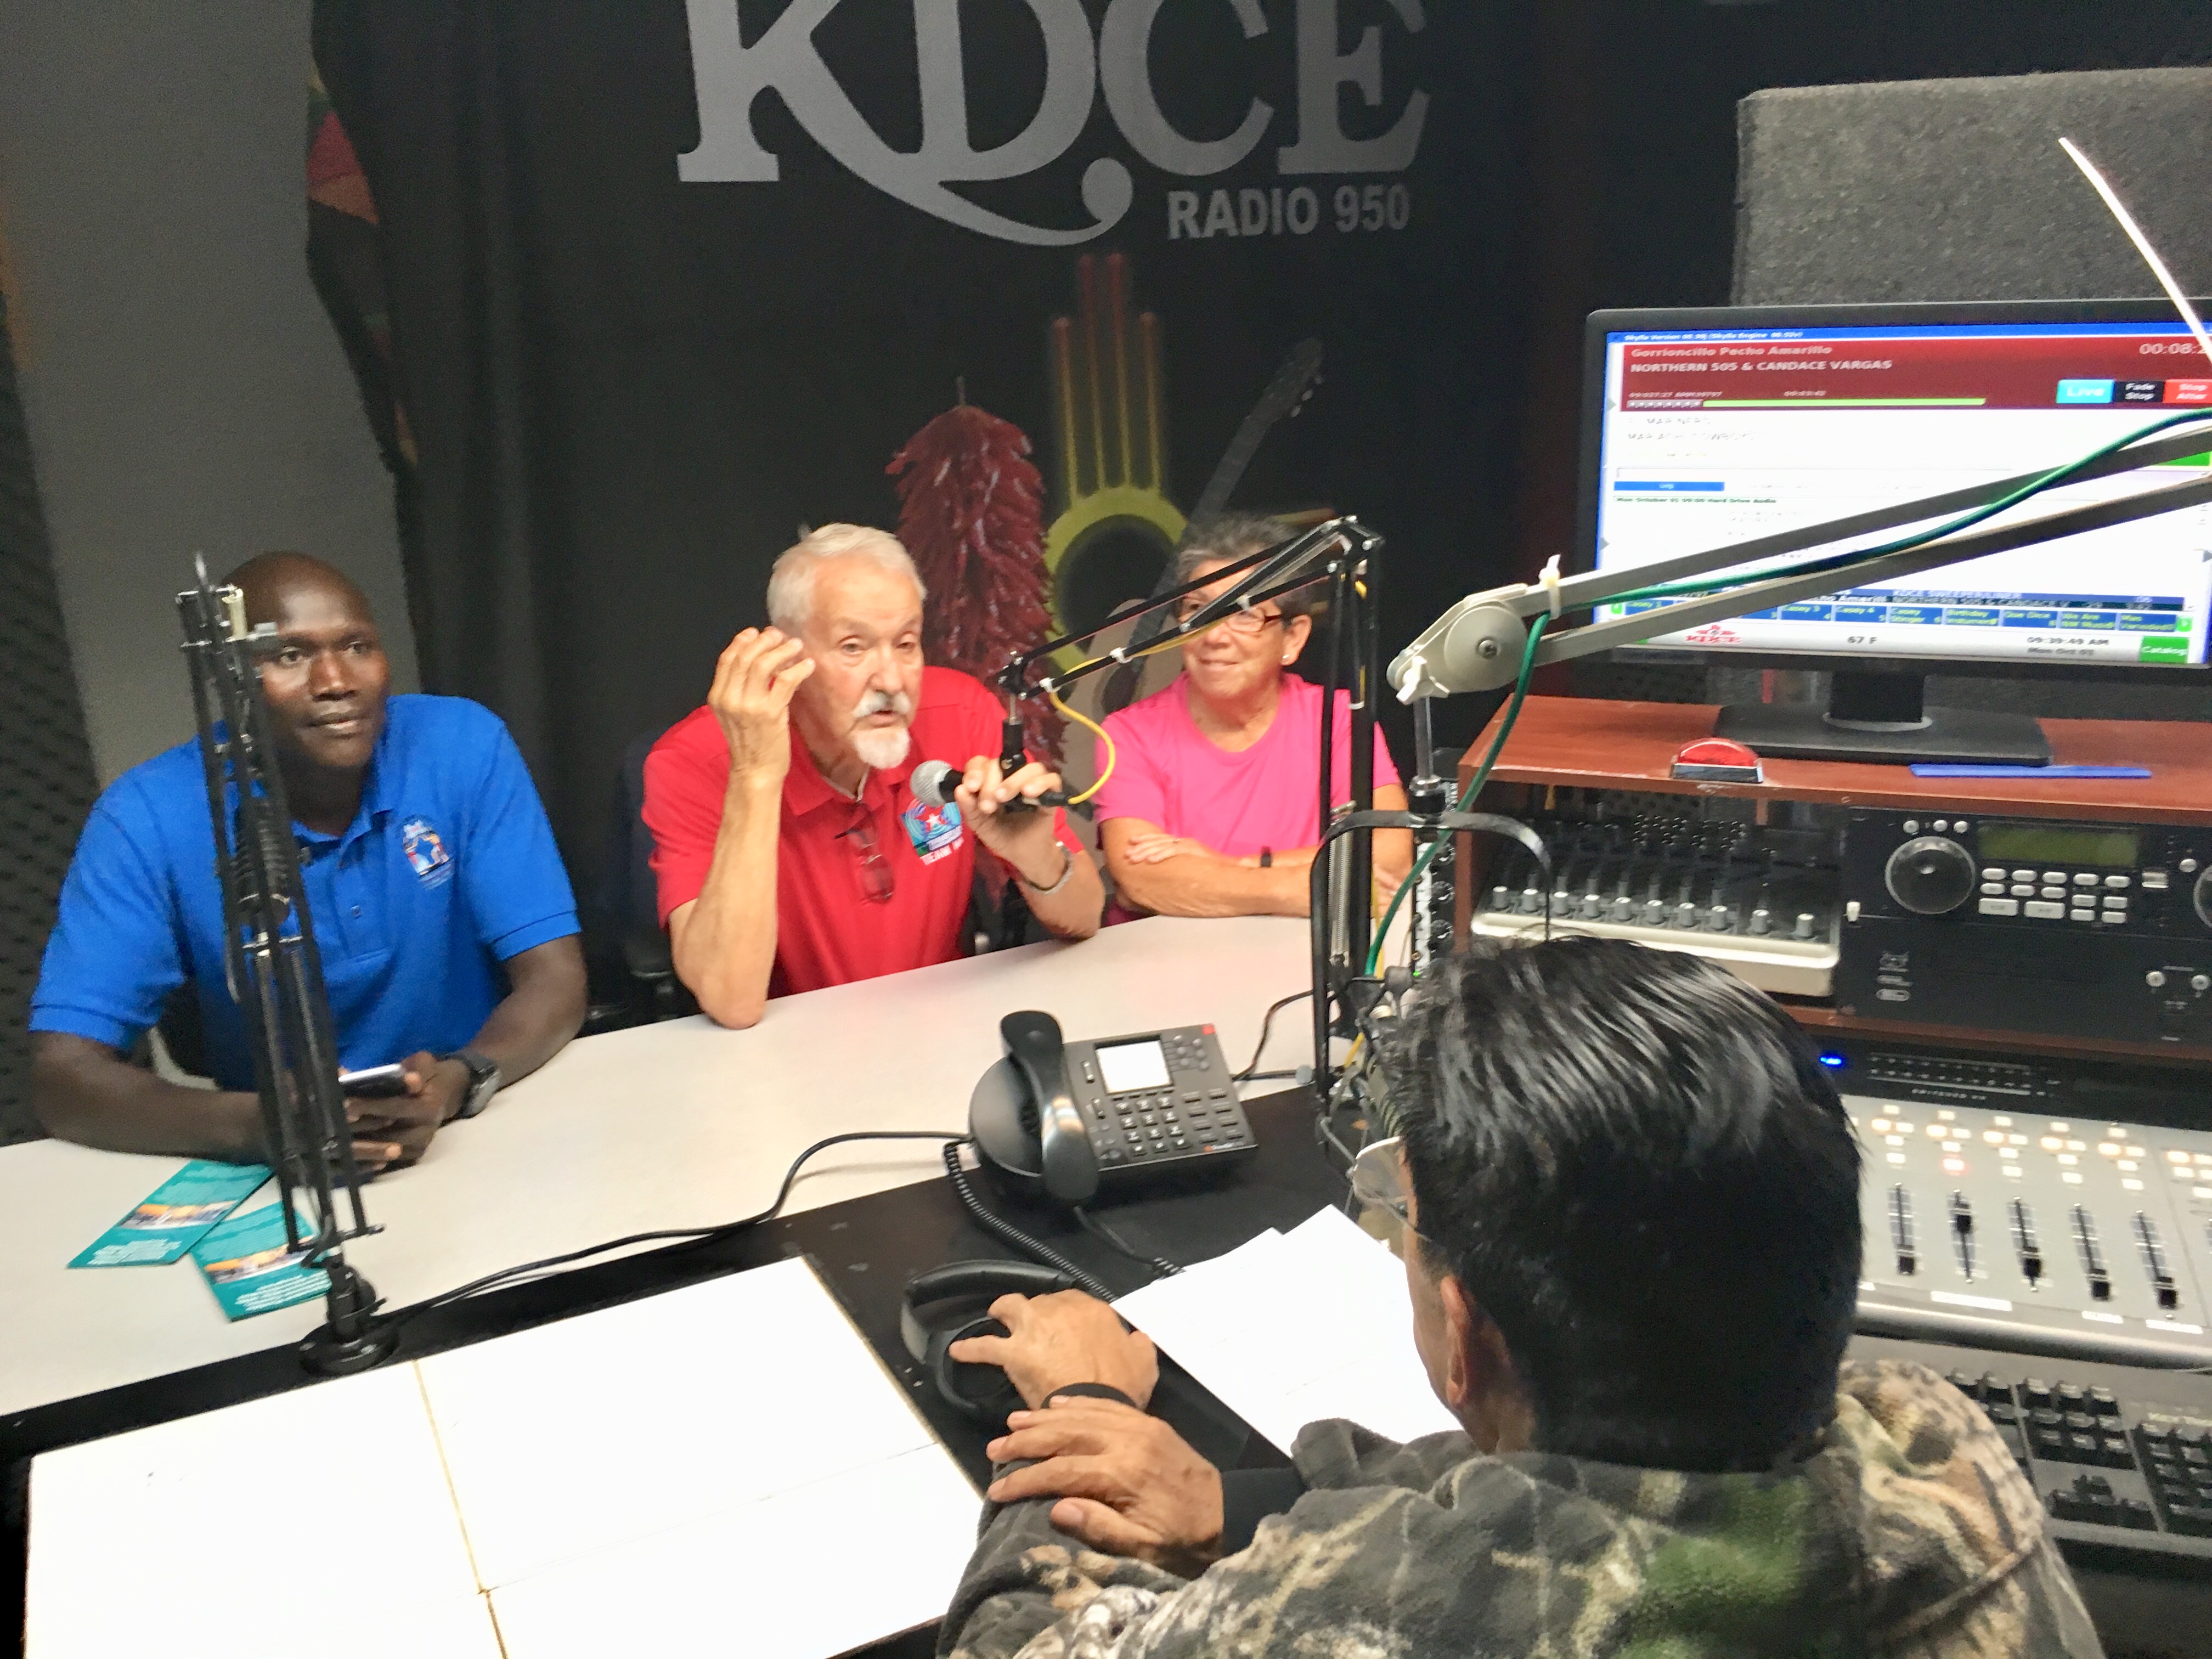 KDCE Radio Interview: Abraham Kosgei Promotes Wellness Center, Members, & New Silver Sneakers Fitness Program